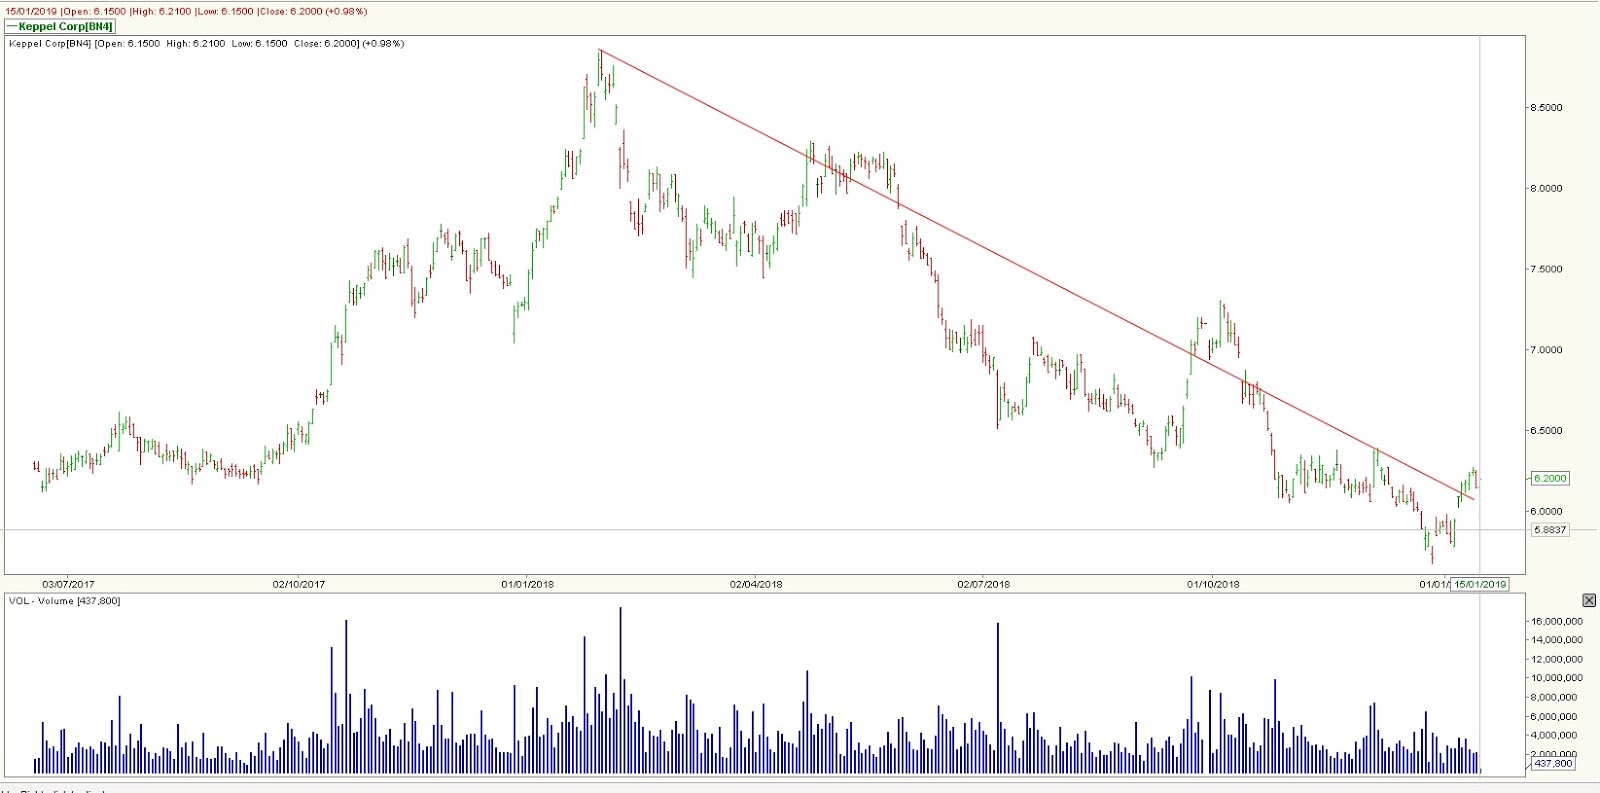 Keppel Corp Stock Chart